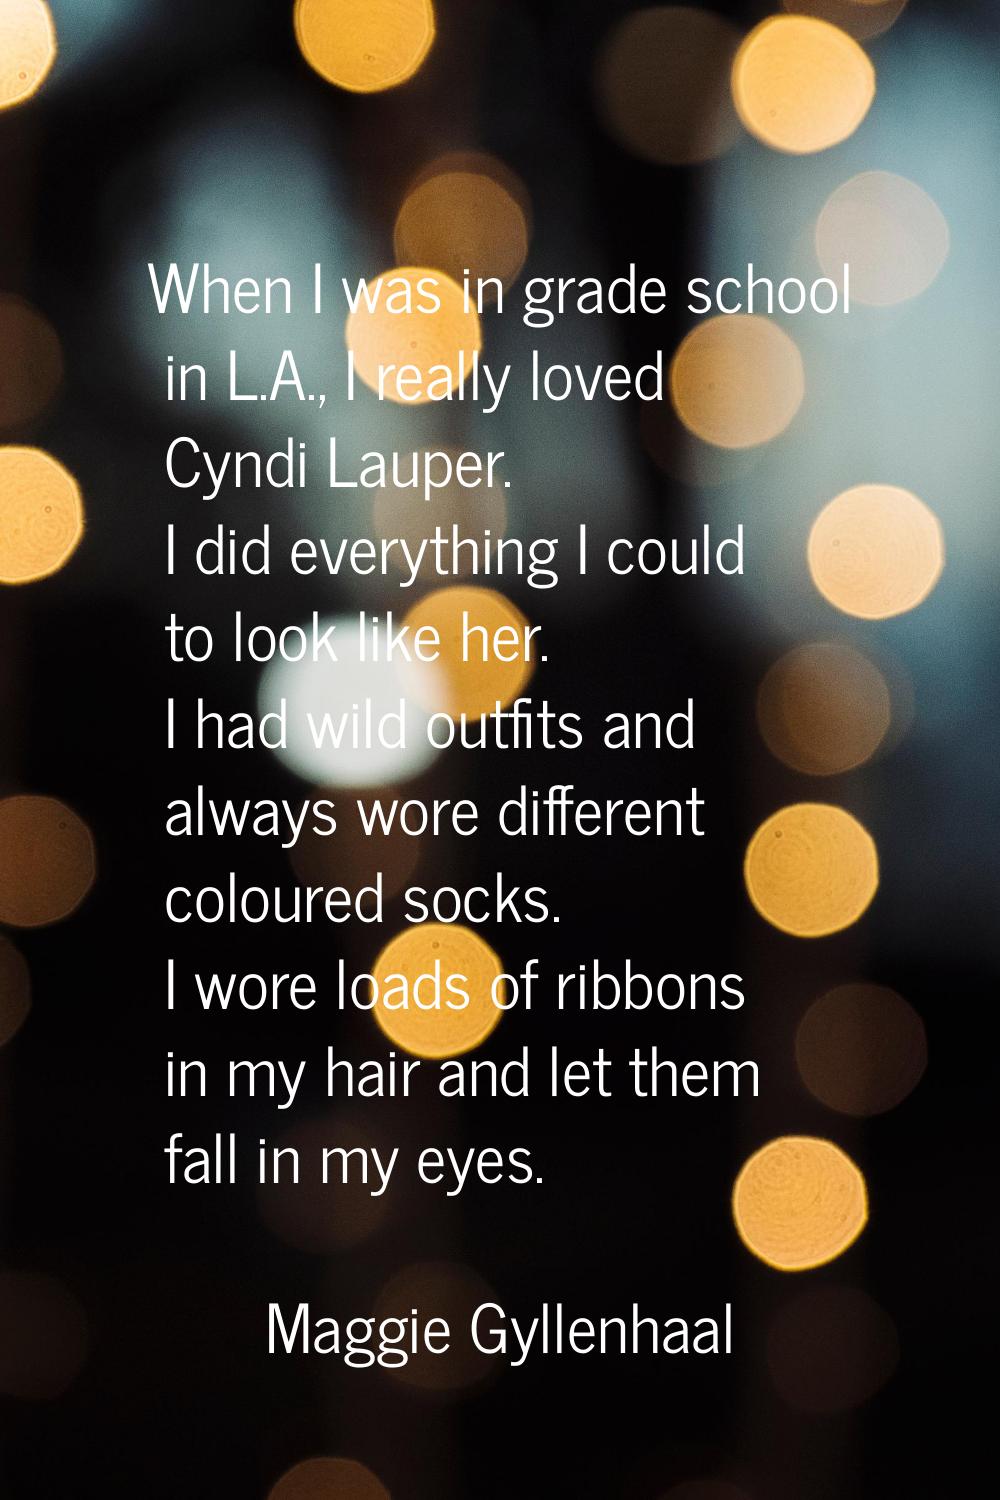 When I was in grade school in L.A., I really loved Cyndi Lauper. I did everything I could to look l